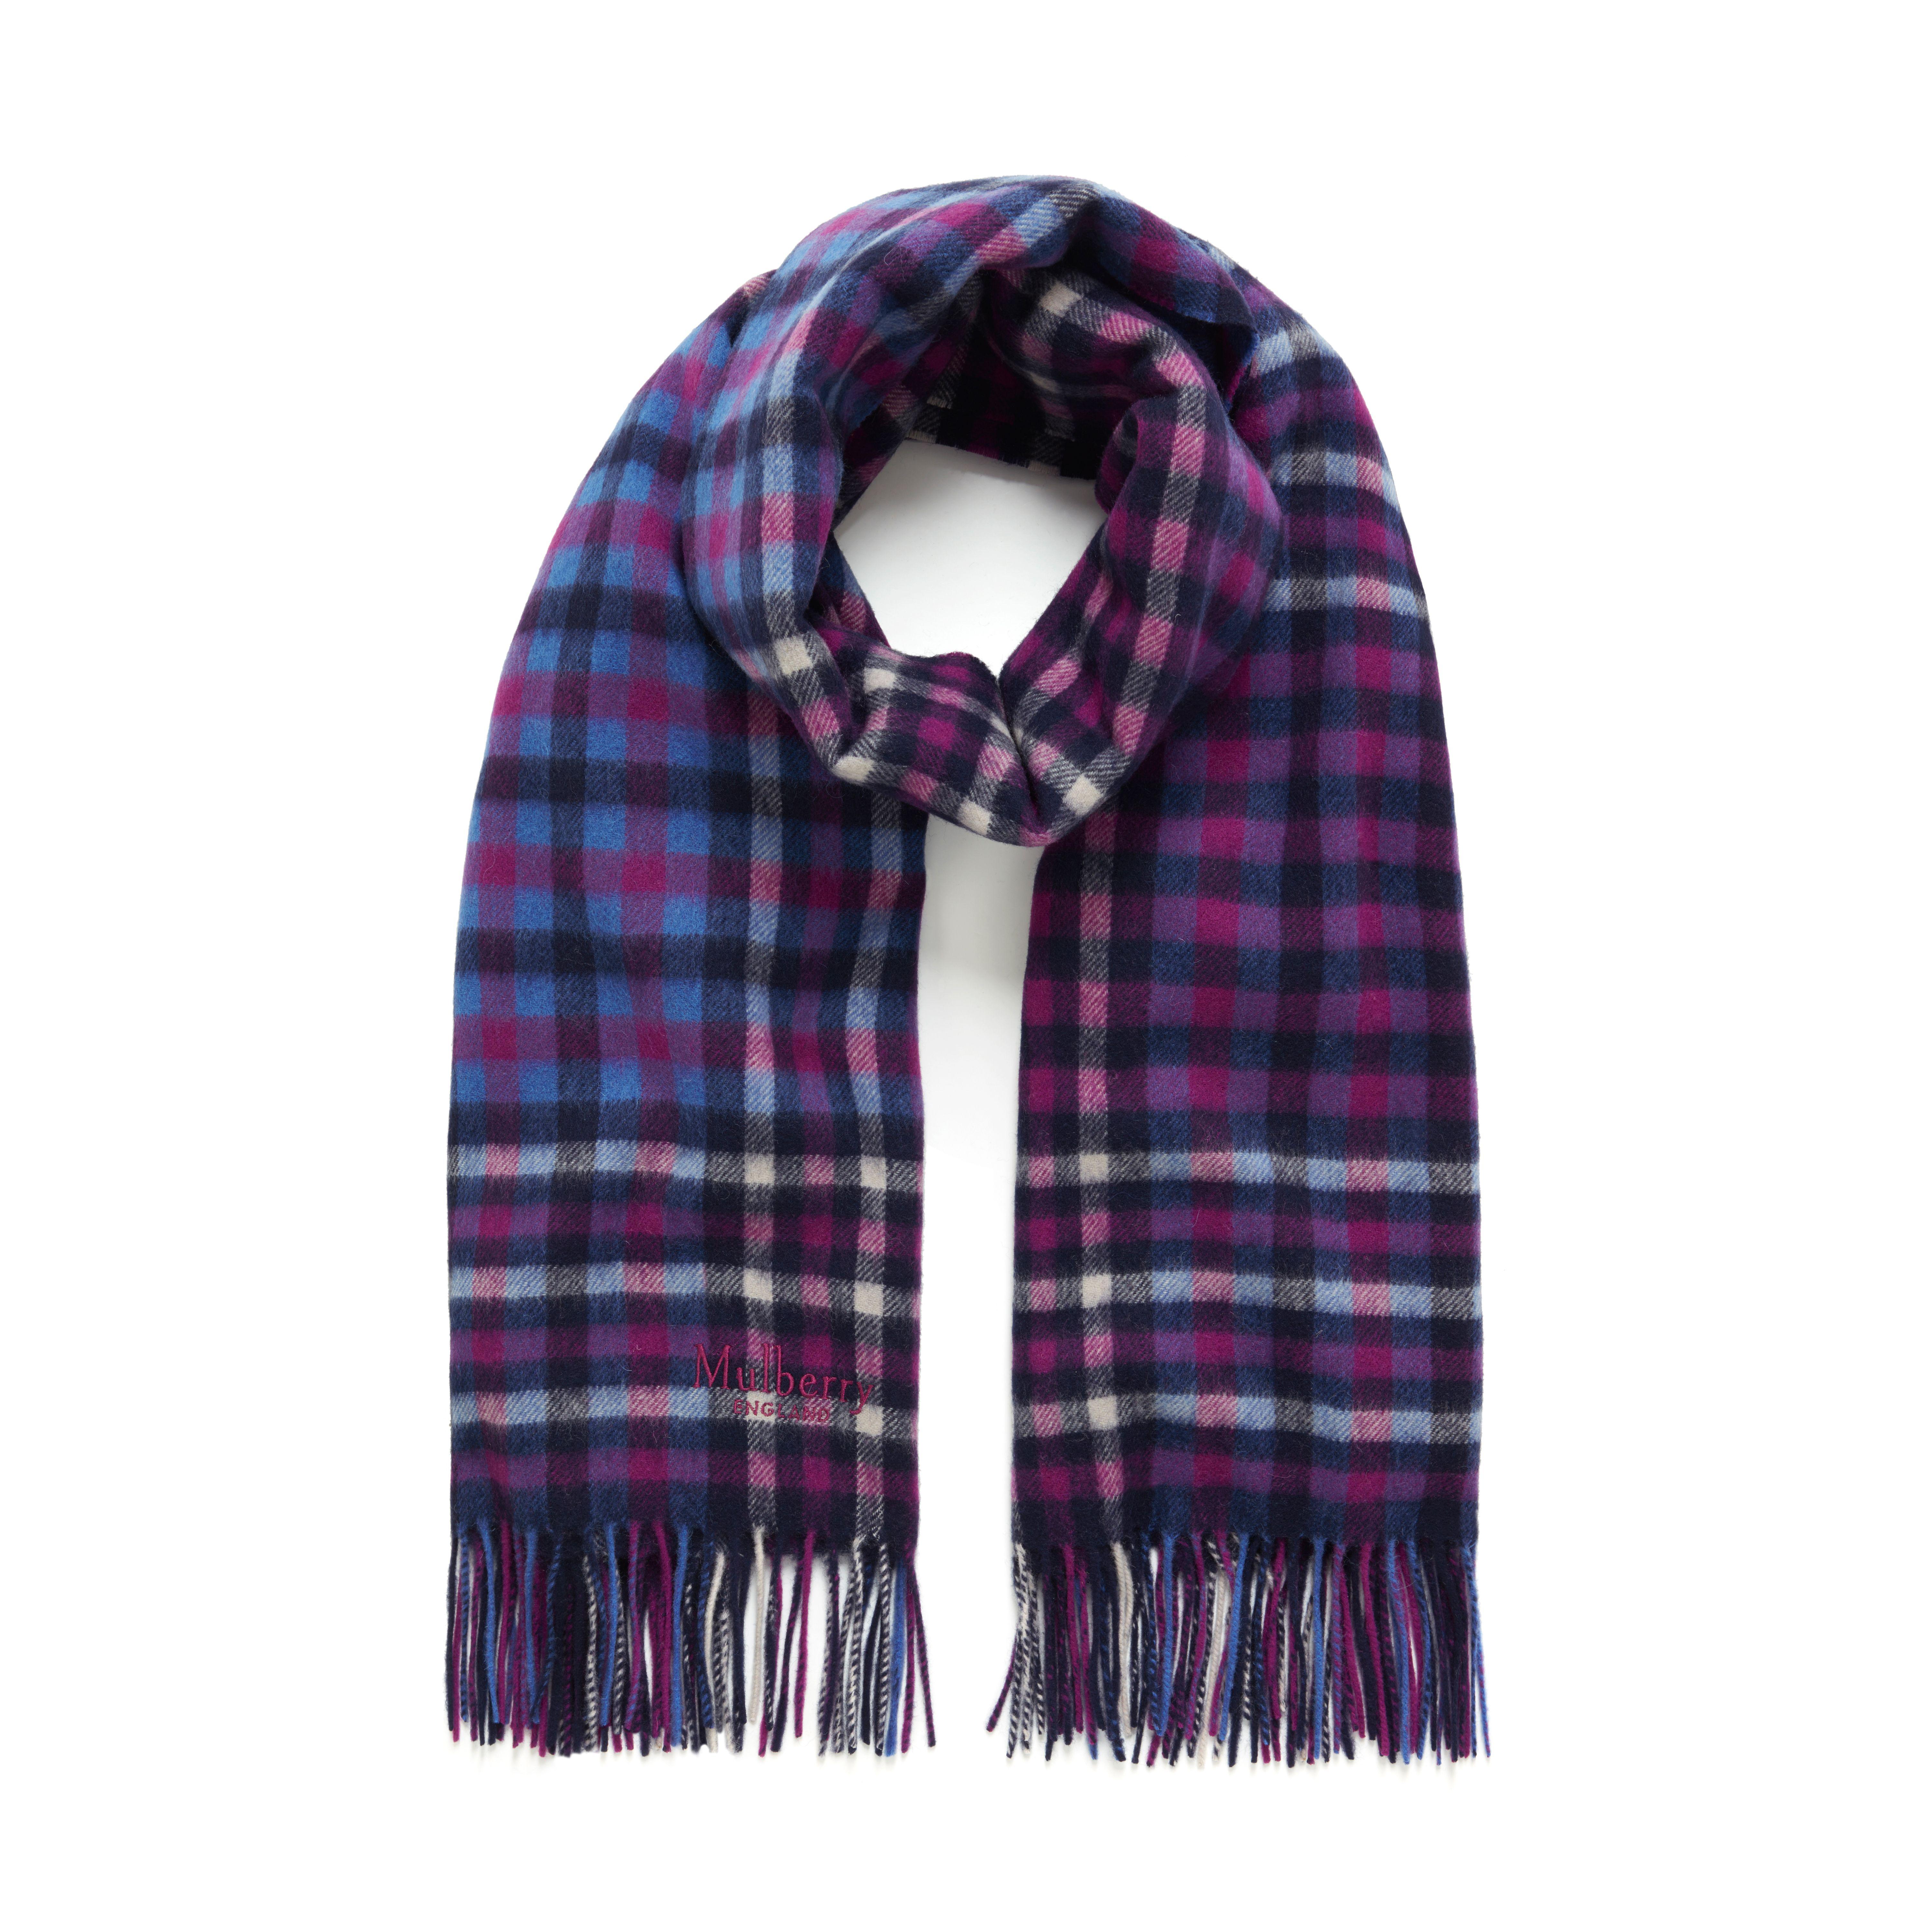 Mulberry Large Check Lambswool Scarf in Violet (Purple) - Lyst